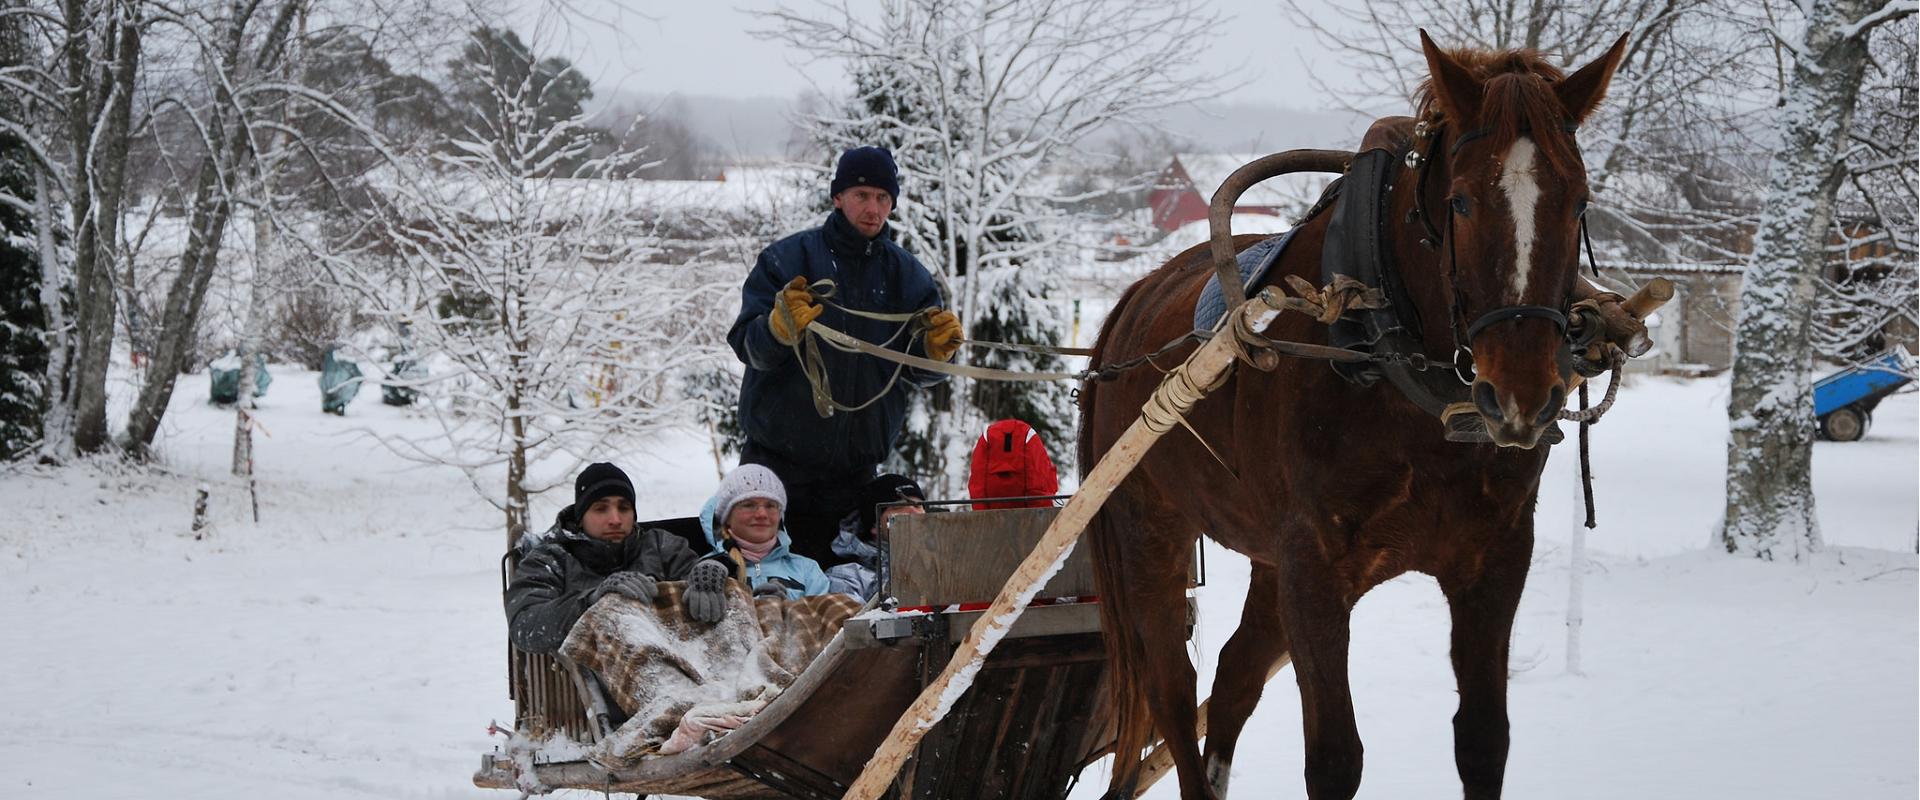 Sleigh ride in the wintery nature at Pärnu County